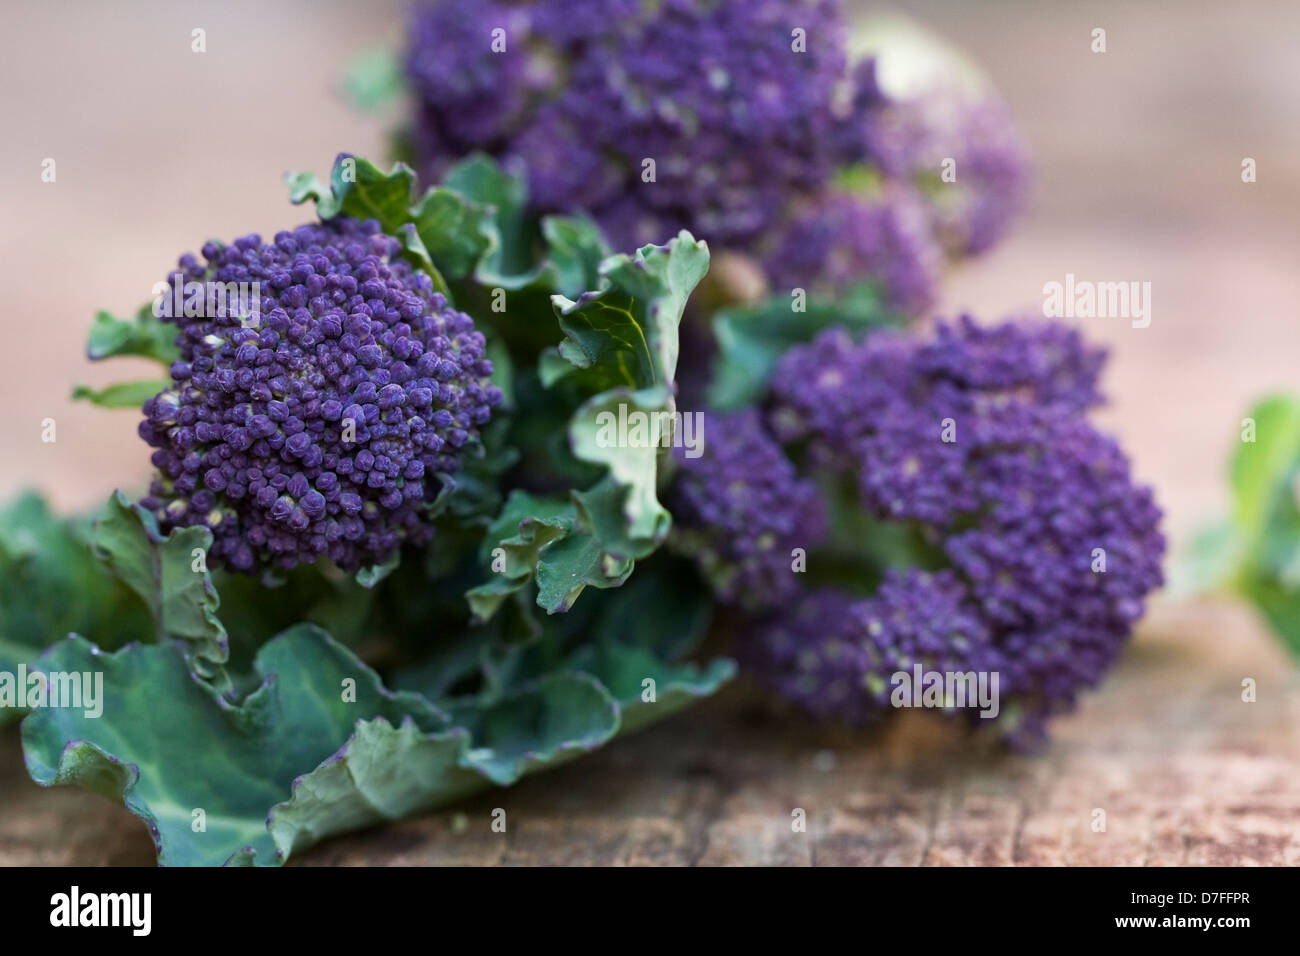 Brassica oleraceae. Purple sprouting broccoli on a wooden board. Stock Photo